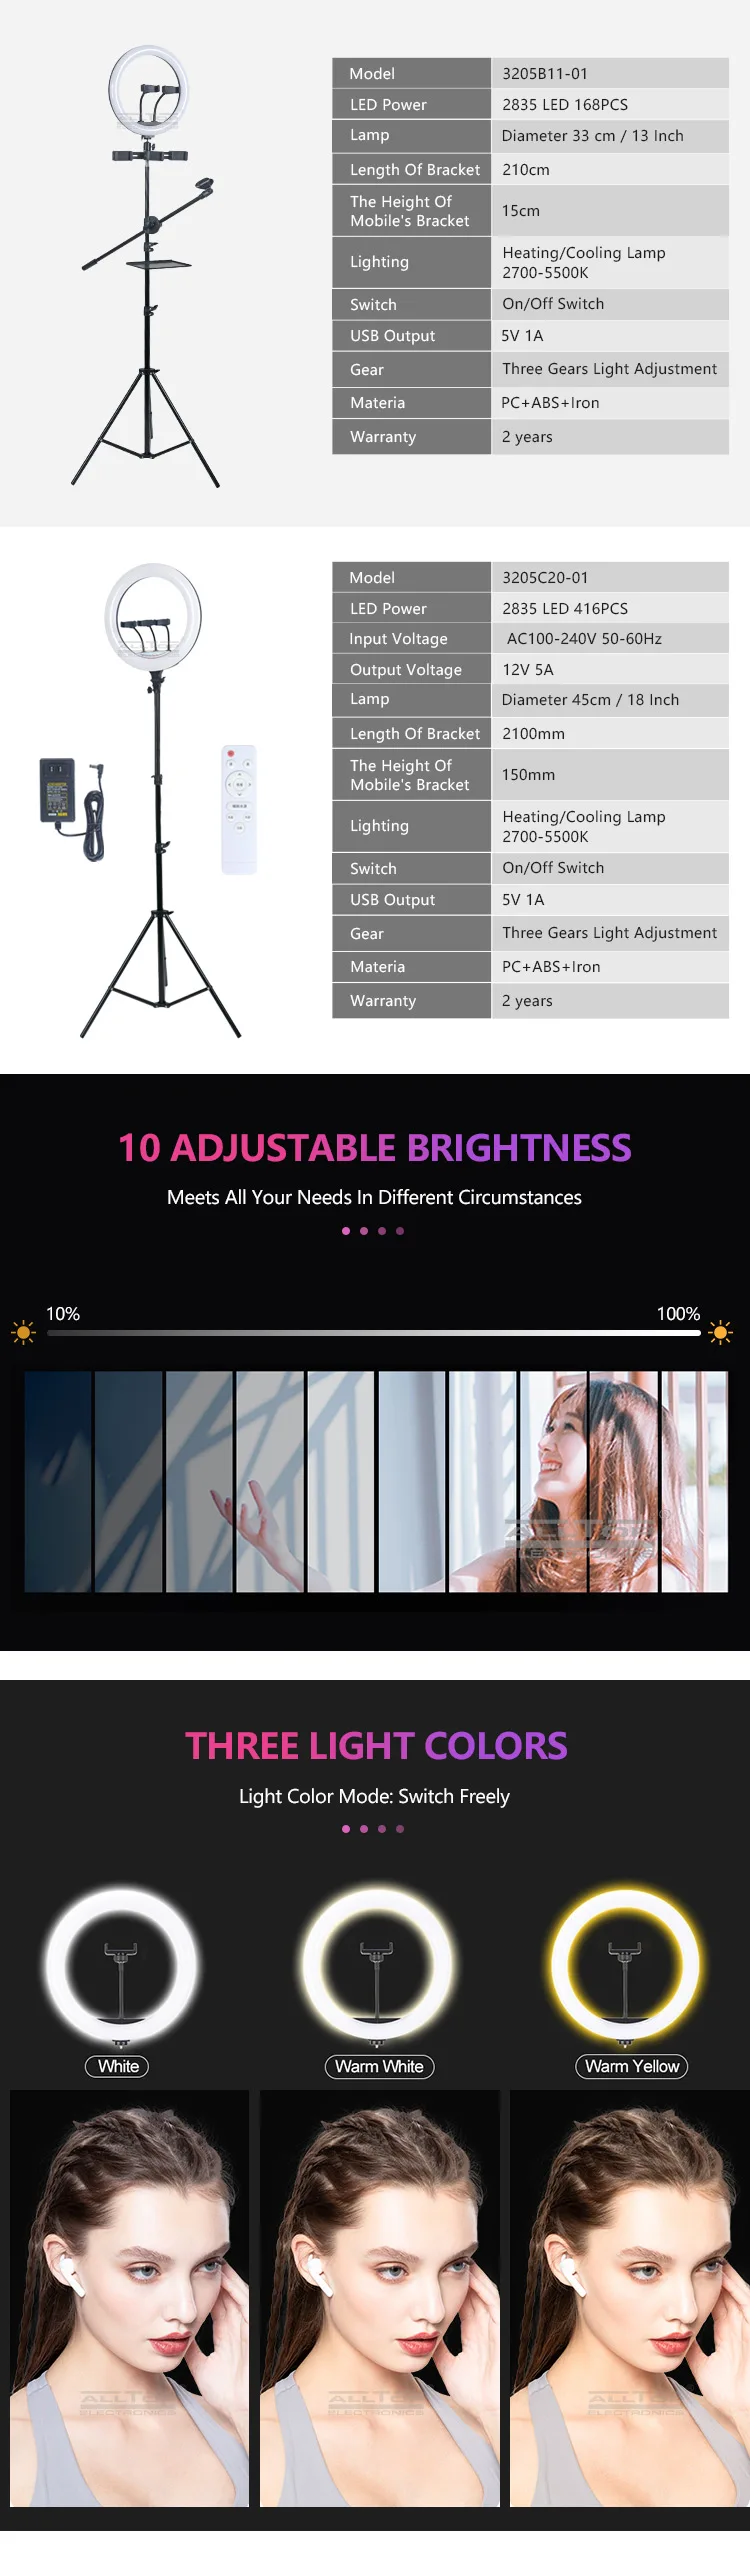 ALLTOP Photographic live streaming lighting kit beauty lamp remote control 18Inch indoor selfie led ring light